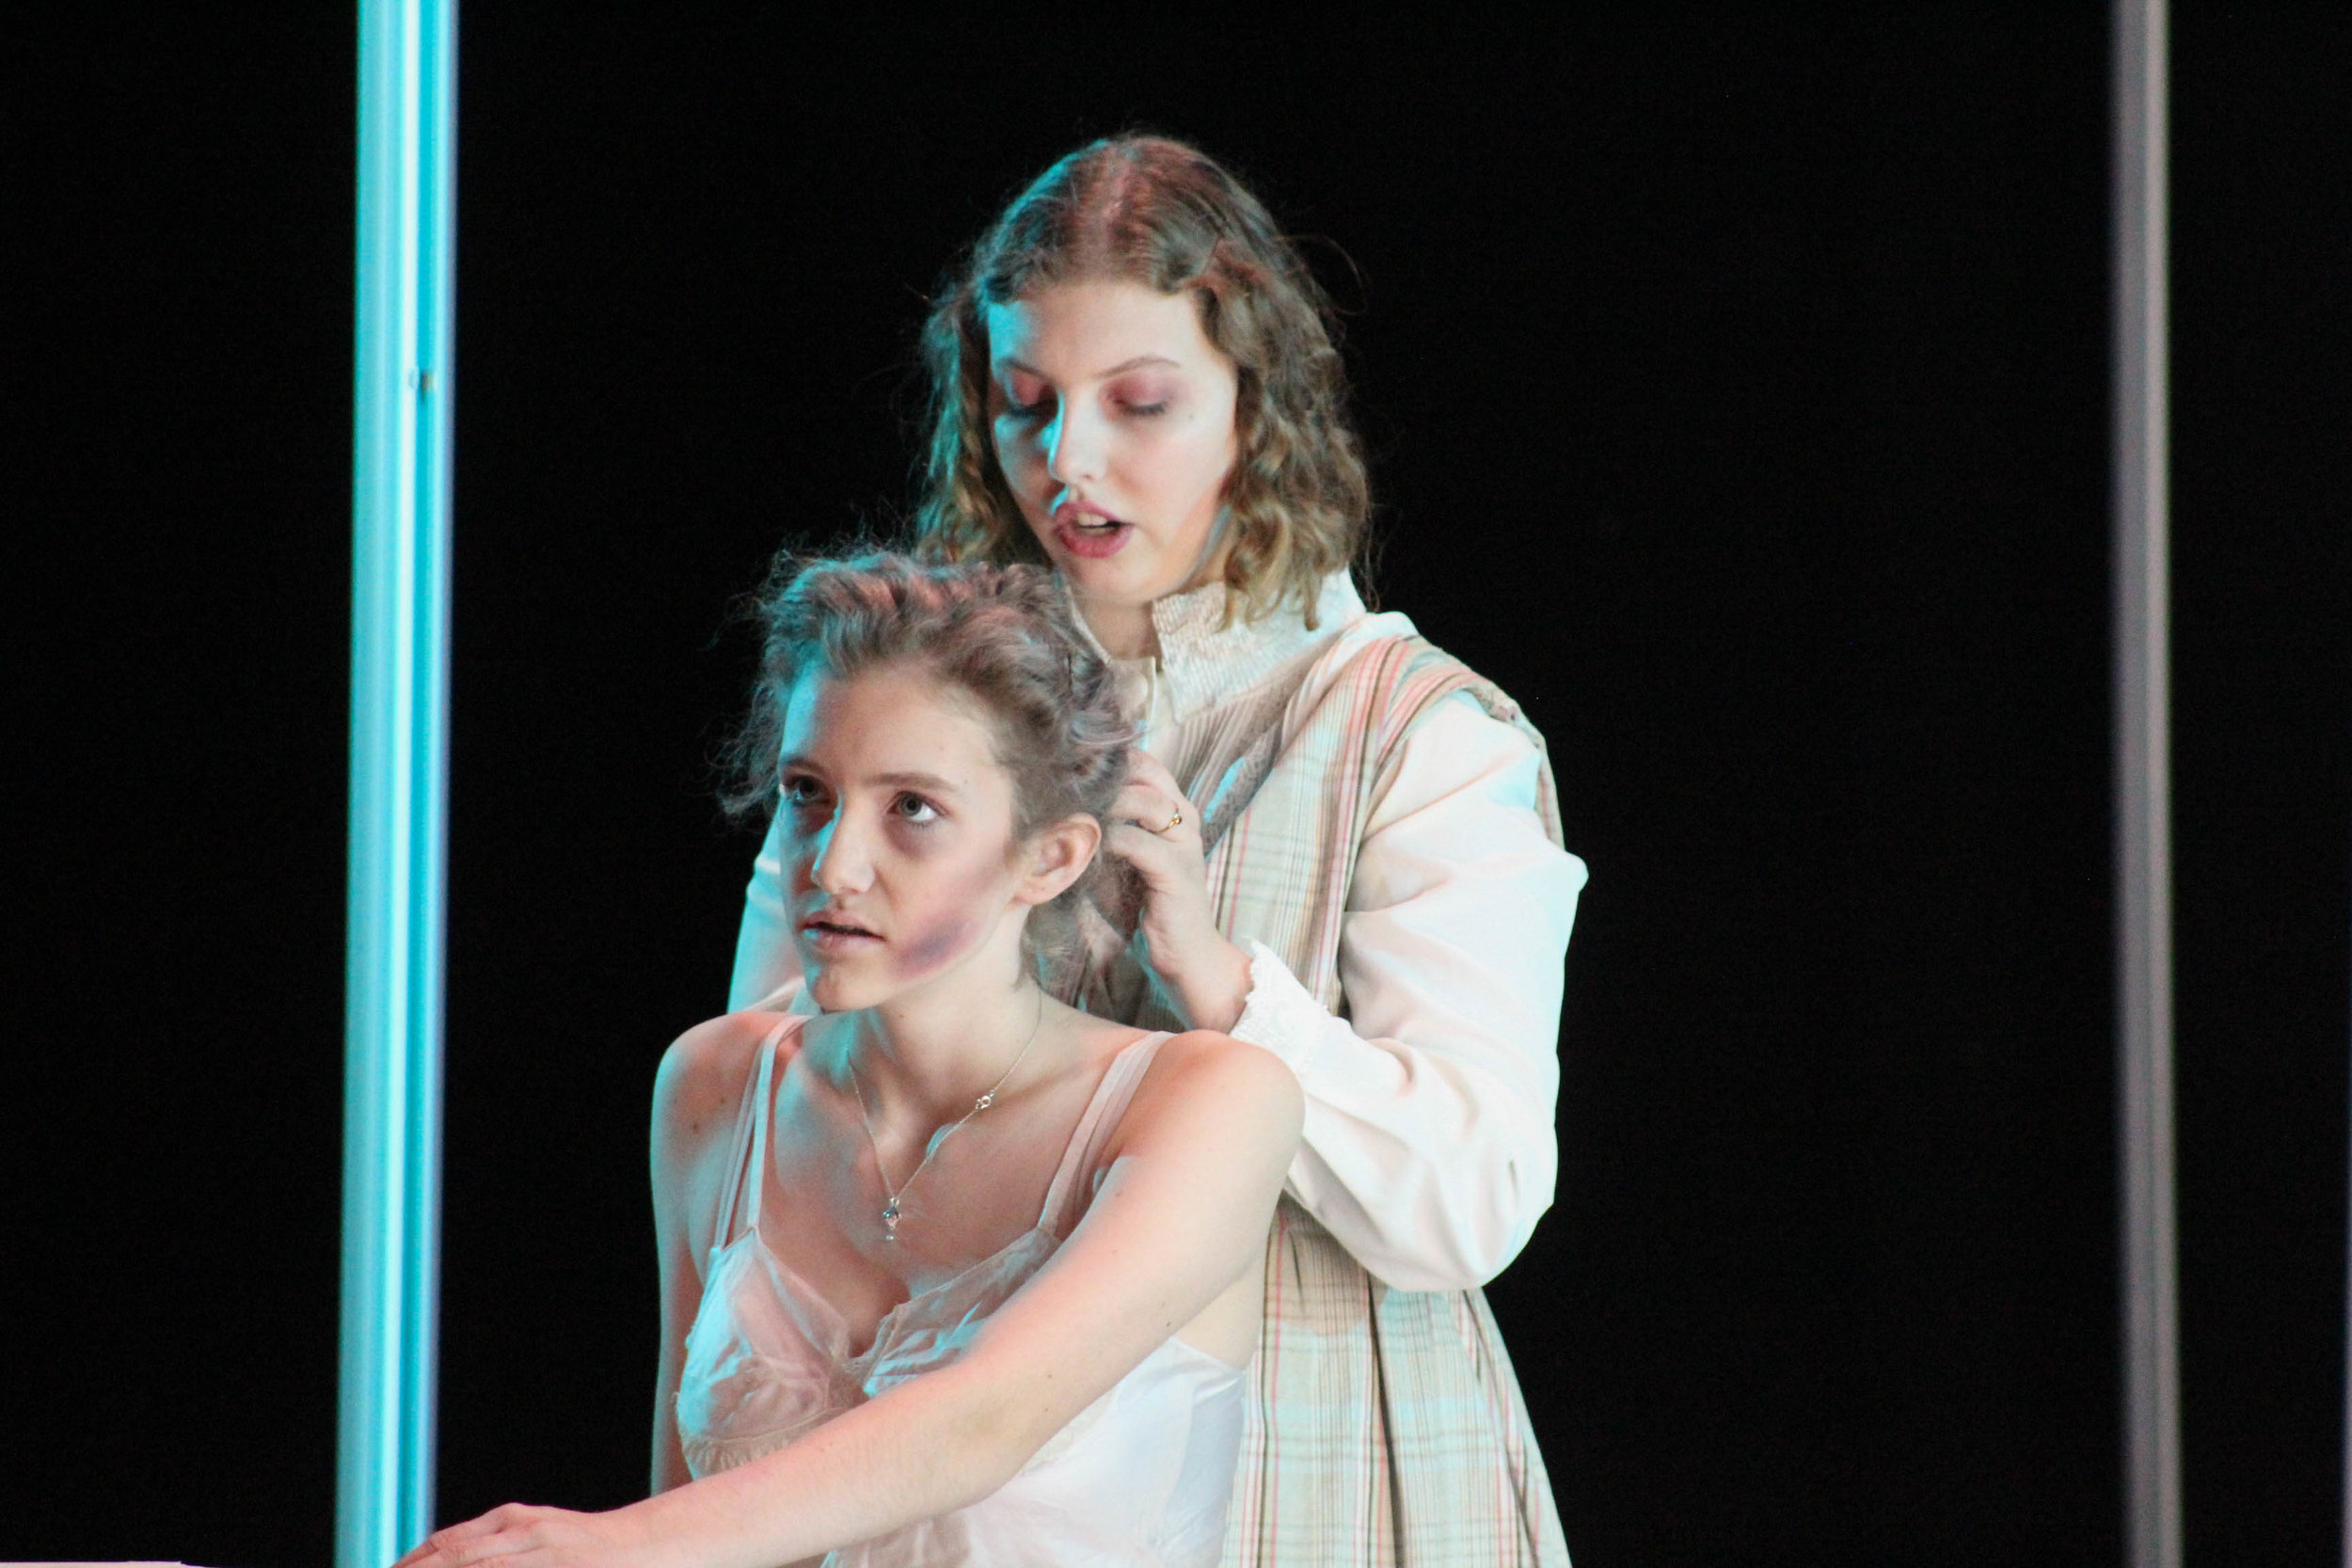 Skye McDonaldVee Ashmun and Lilly Grey onstage in a moving scene as Ashmun’s character, Grace Fryer, is dying from radium poisoning.